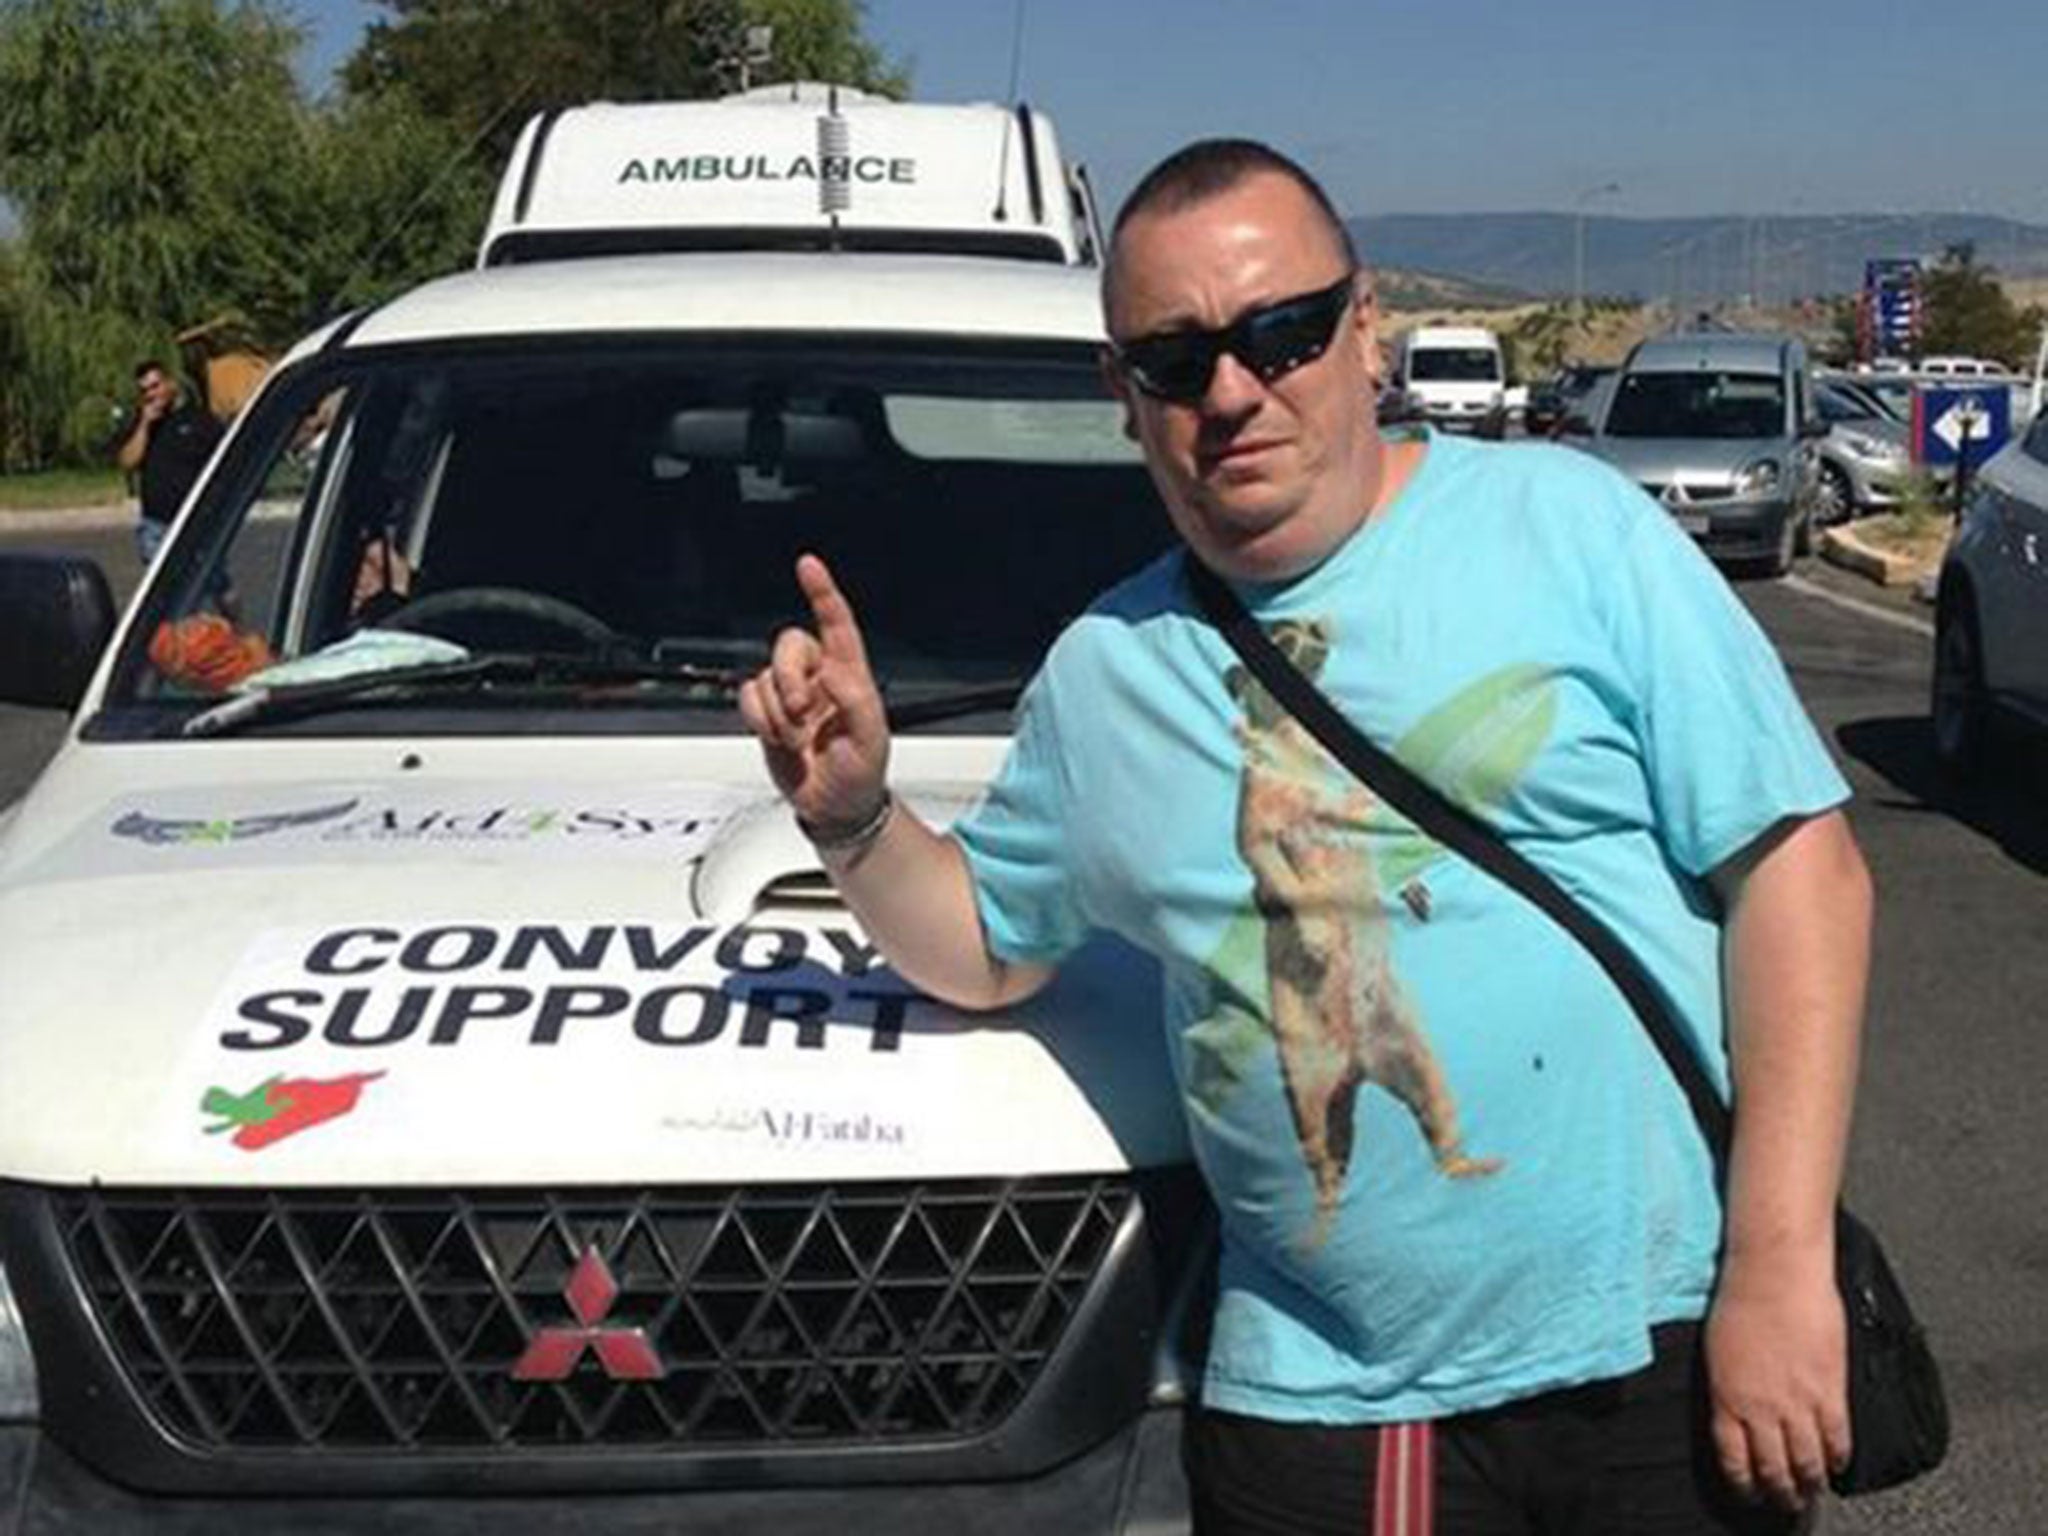 Aid worker Alan Henning, who was murdered by IS militants on Friday